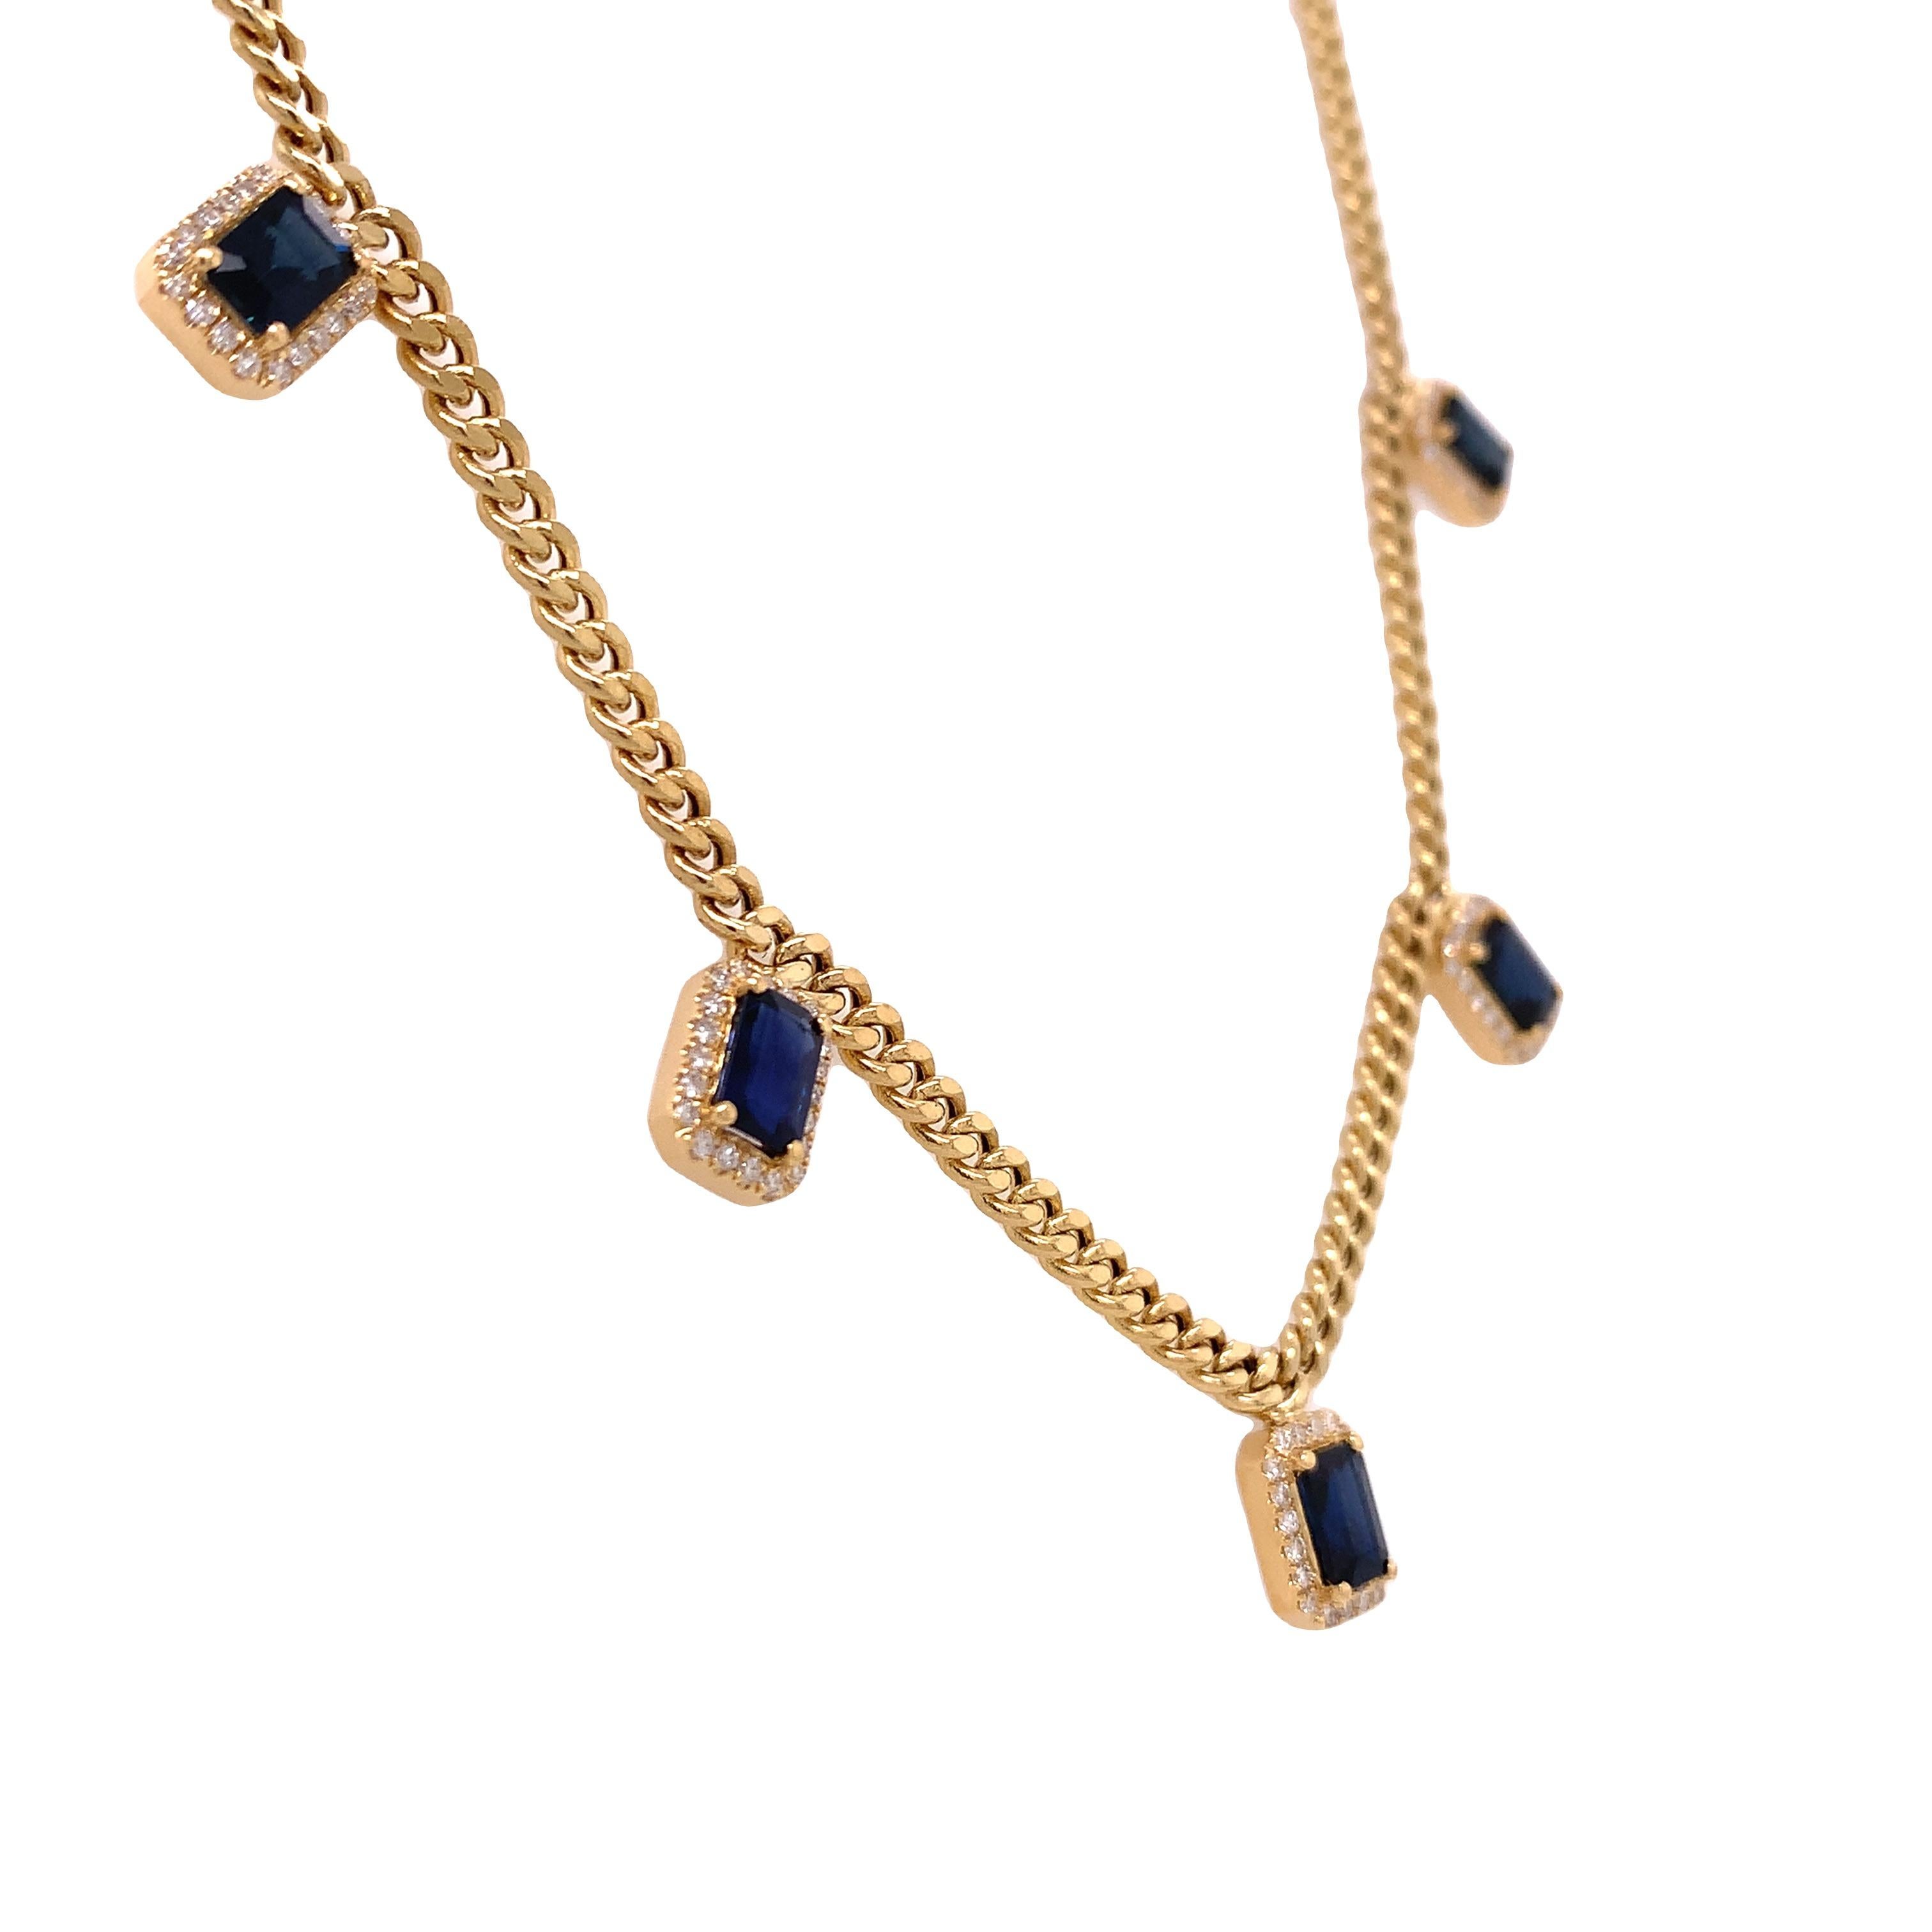 18K Yellow Gold

Blue Sapphire: 3.58ct total weight.
Diamond: 0.48ct total weight.
All diamonds are G-H/SI stones.